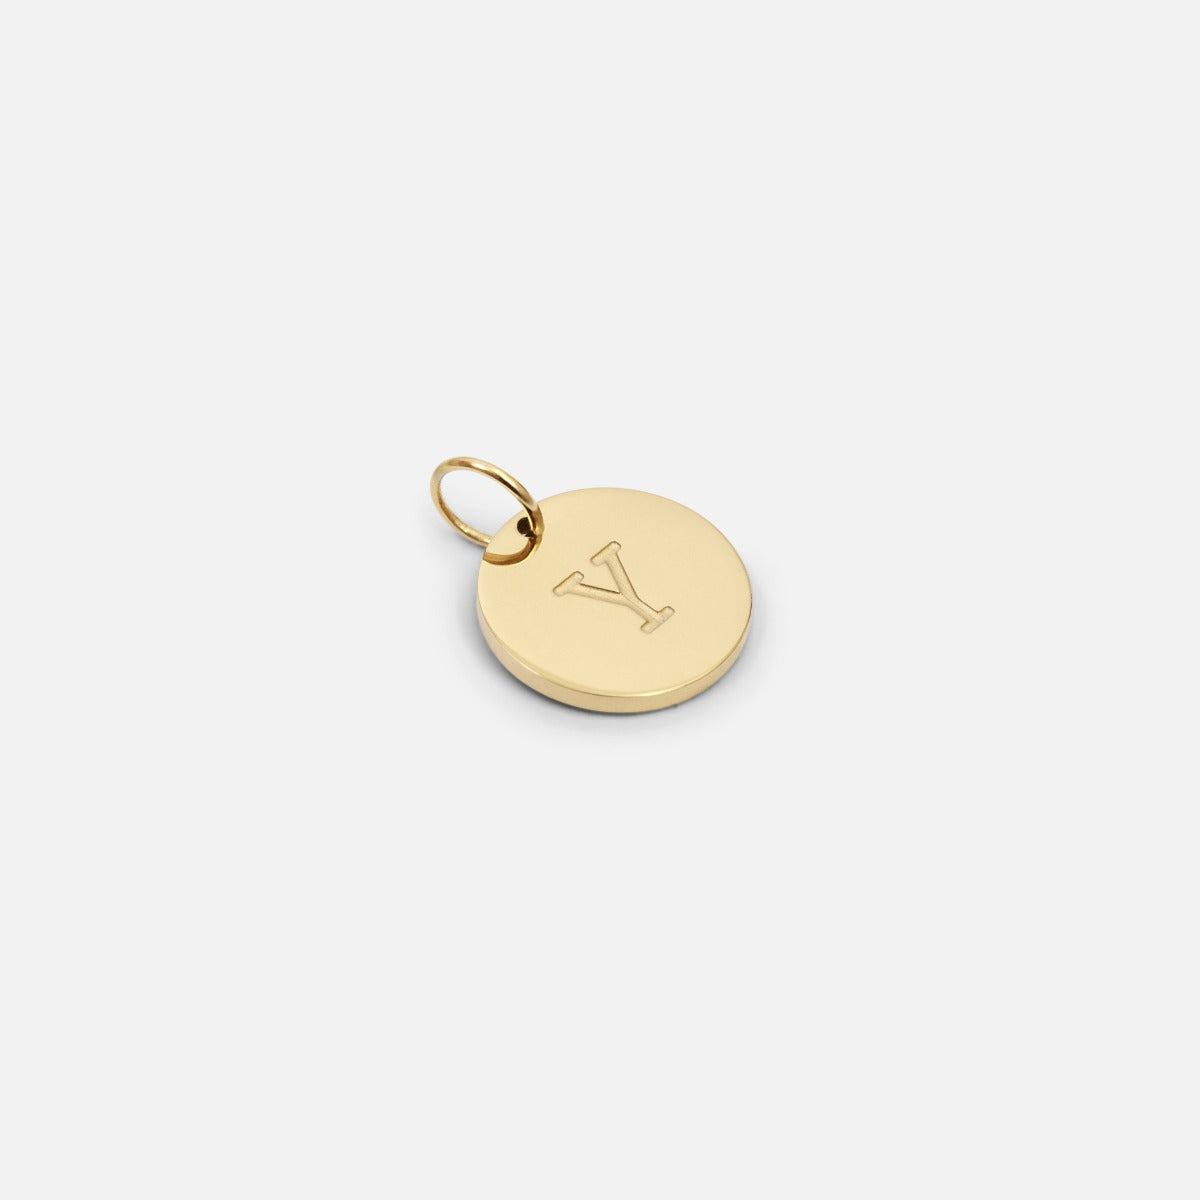 Small symbolic golden charm engraved with the letter of the alphabet "y"